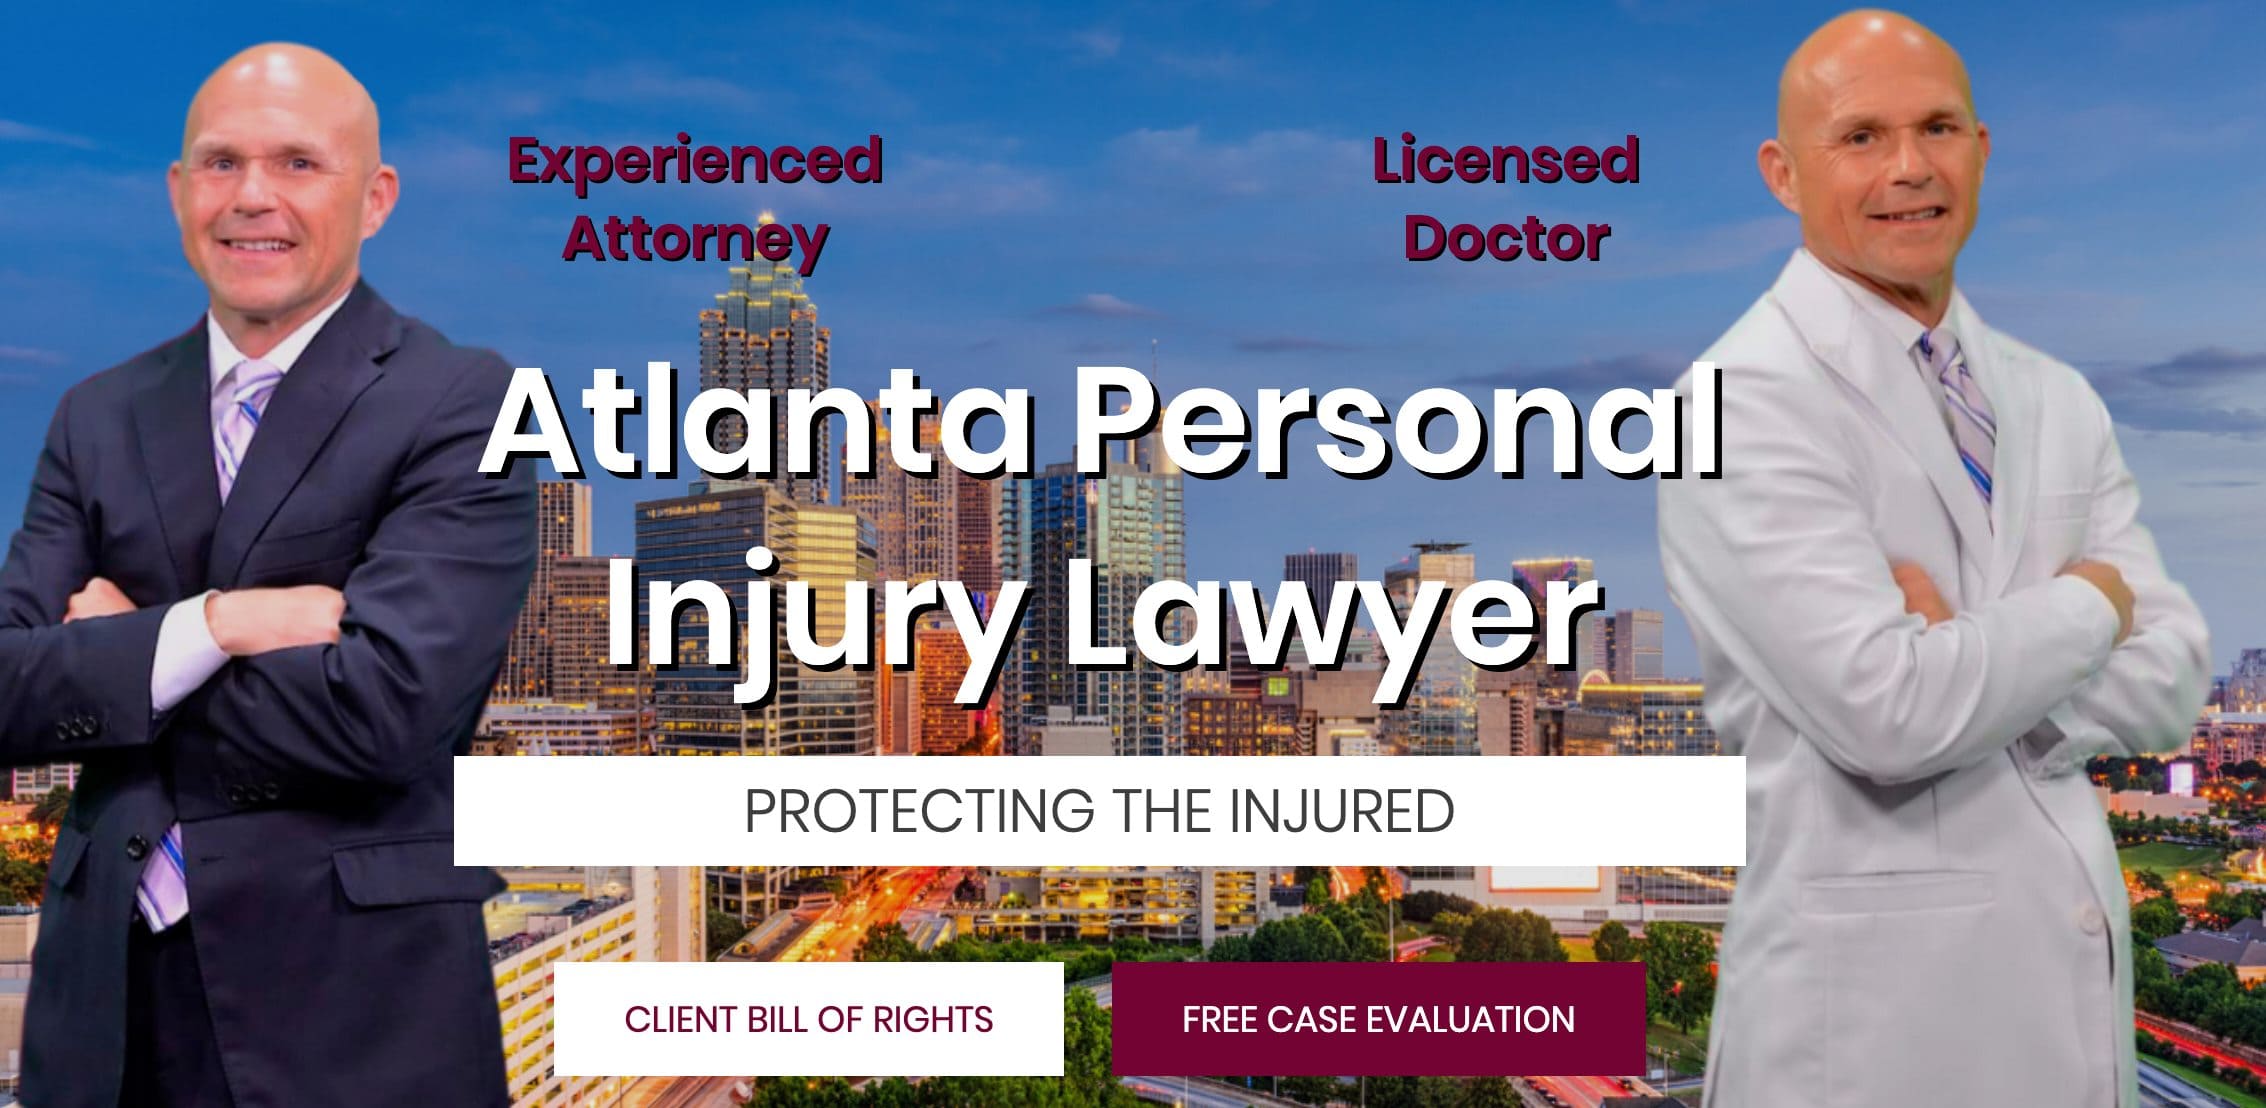 The Brown Firm Personal Injury Lawyers - Atlanta (GA 30318), US, personal injury law